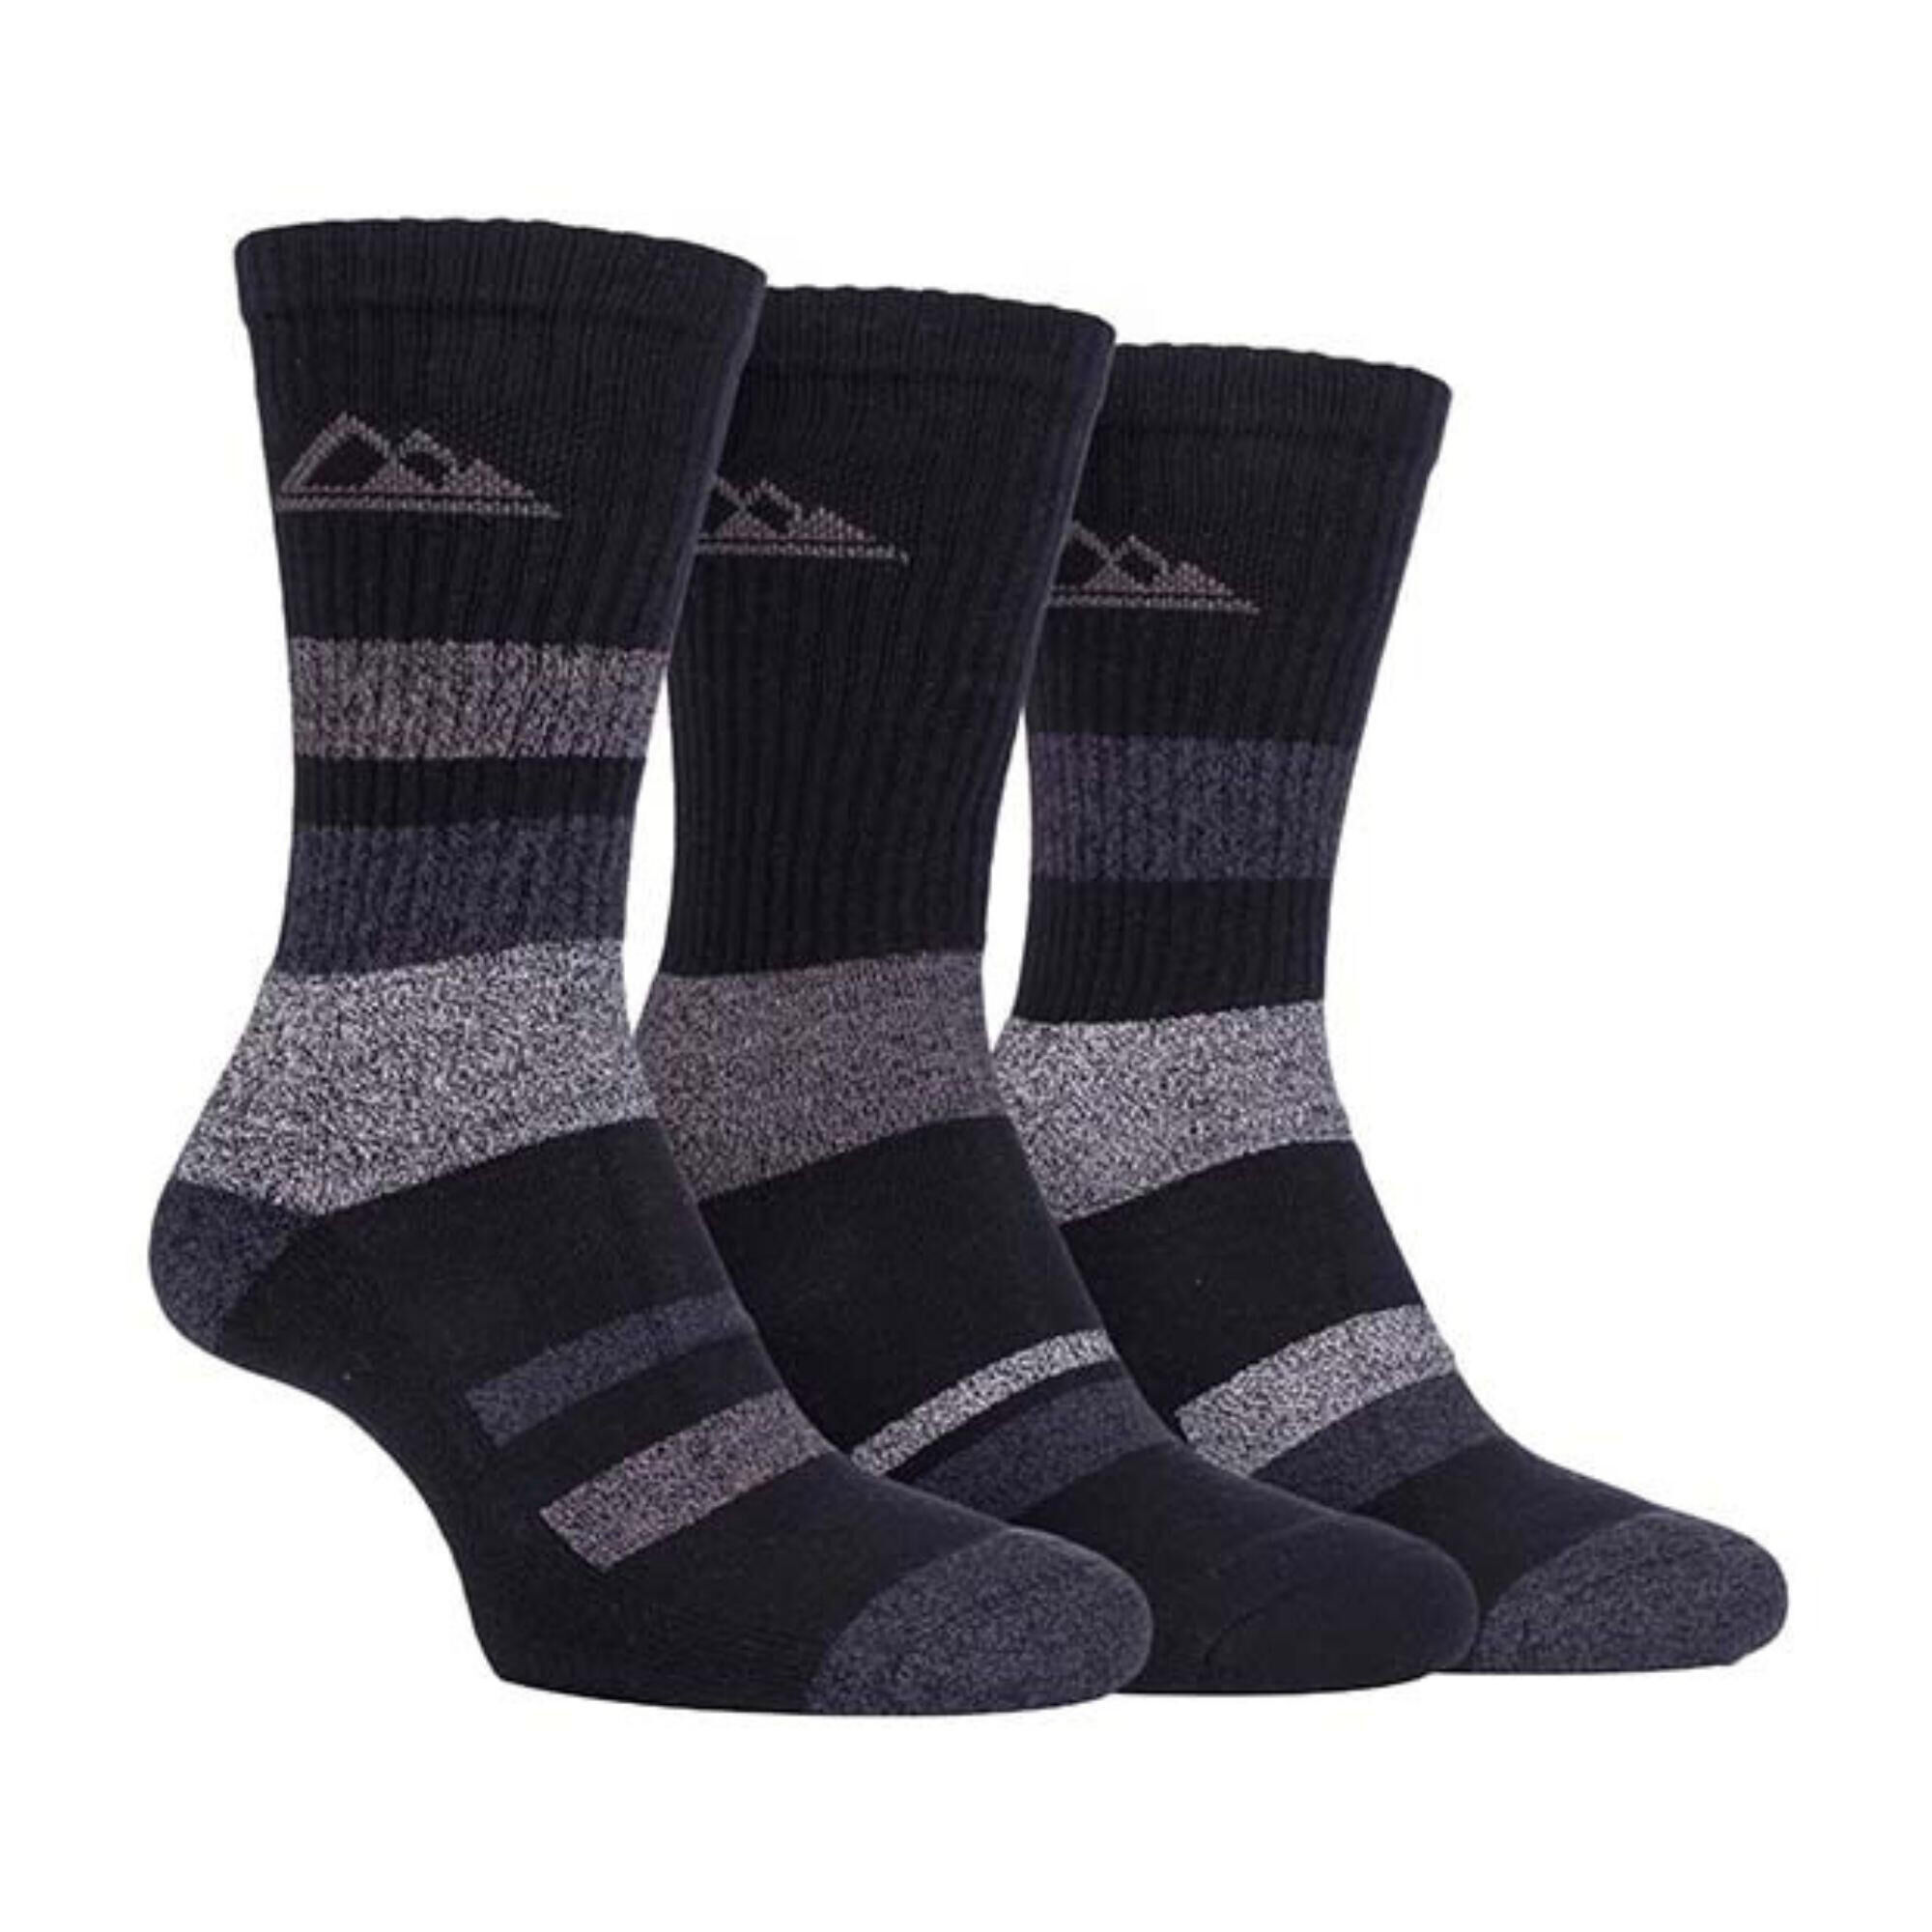 STORM BLOC 3 Pairs Ladies Anti Blister Cotton Hiking Socks with Padded Sole